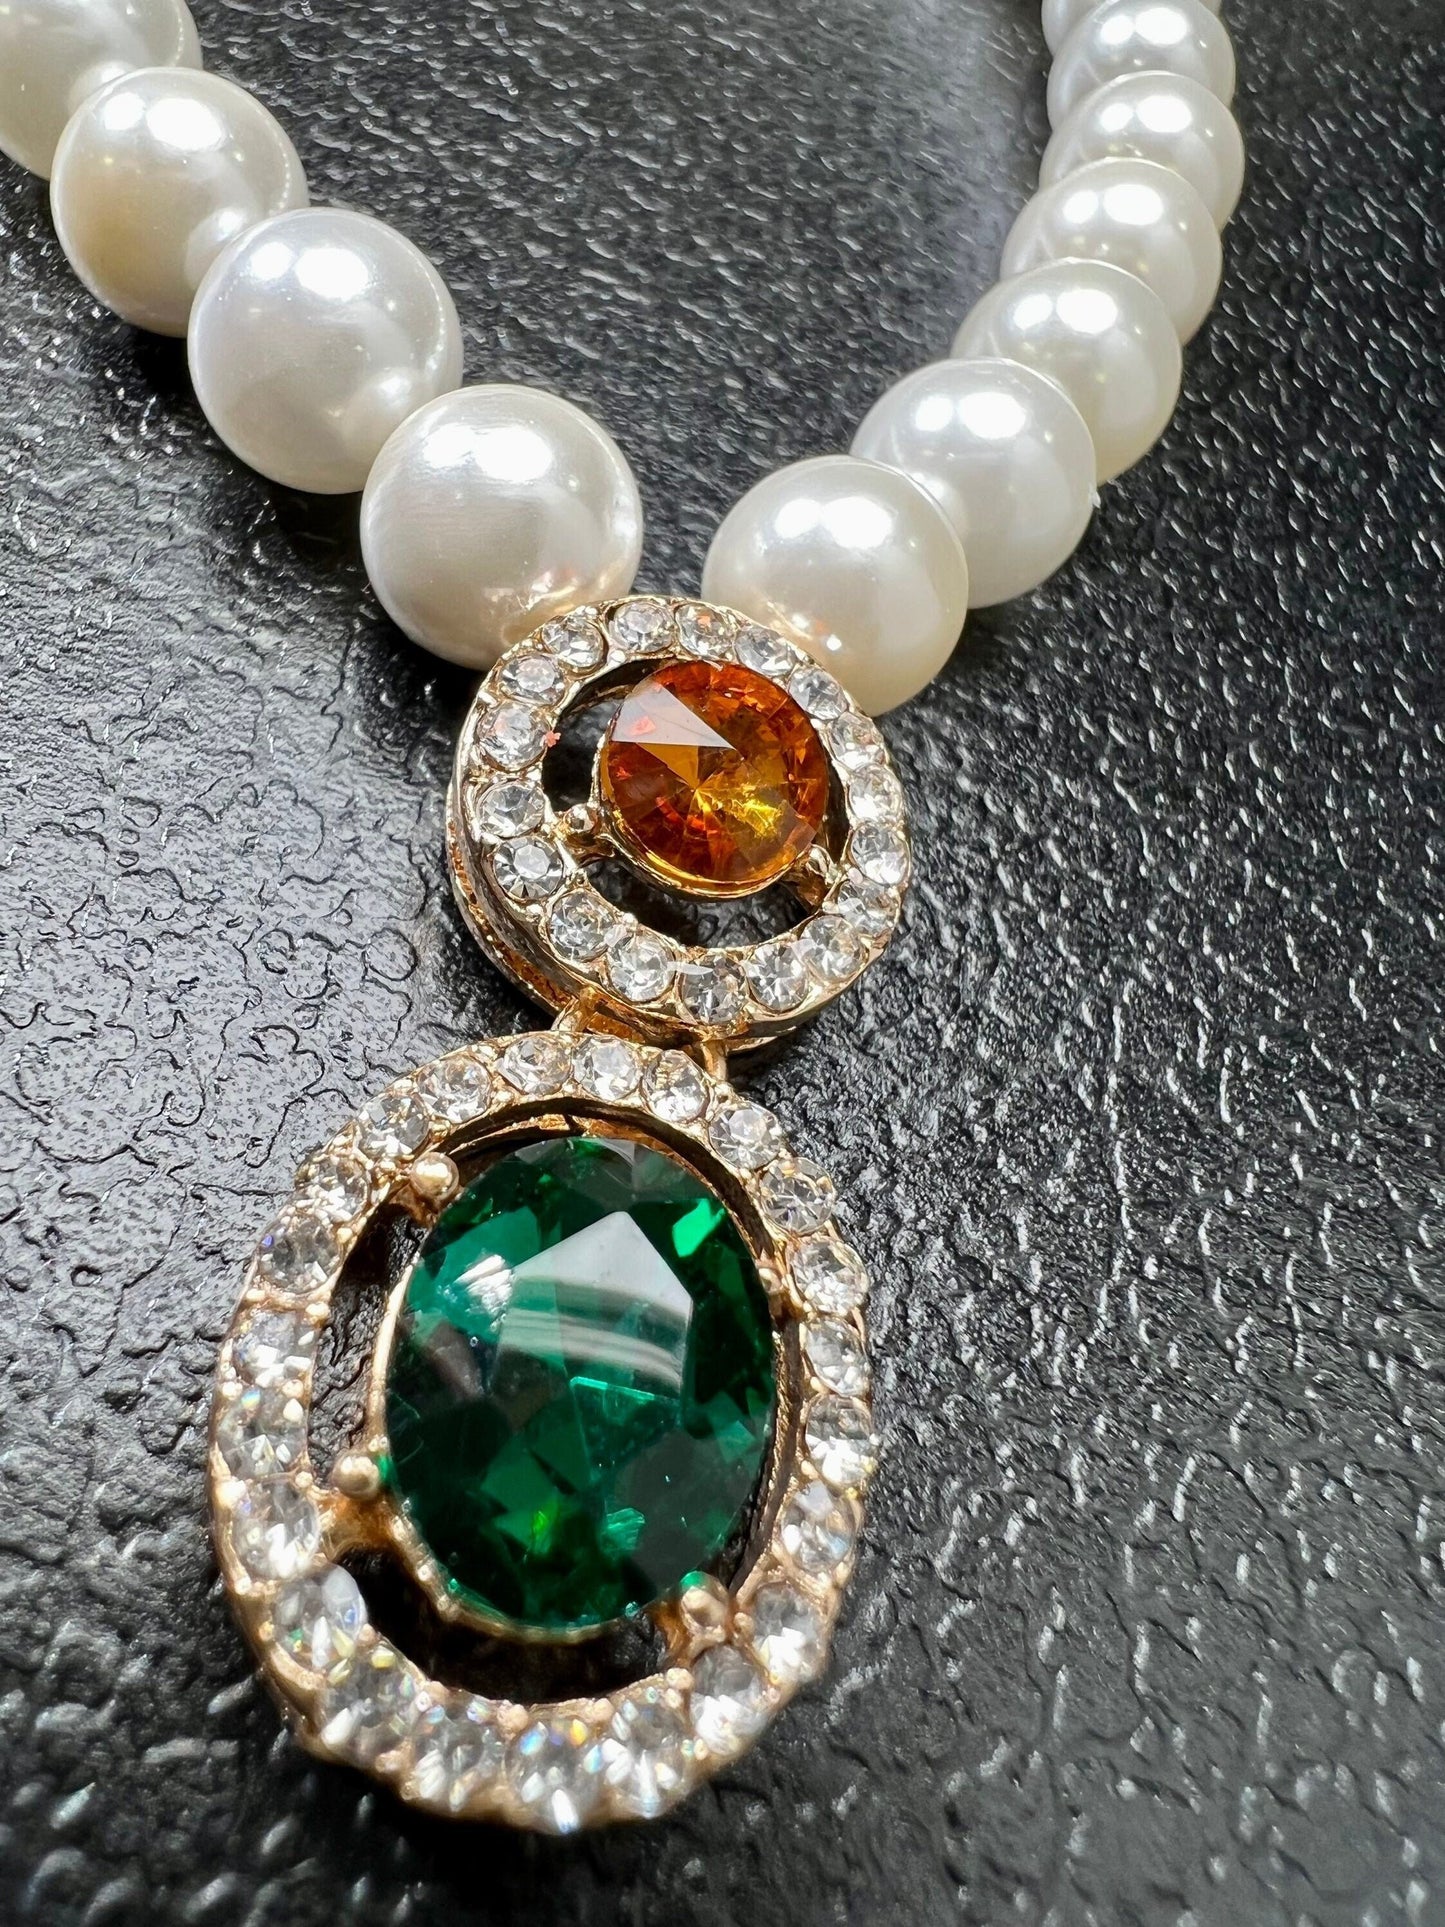 Pearl Necklace South Sea shell Pearl 8mm Round Beads, Yellow Topaz, Emerald CZ Pendant Statement 16” Necklace Strong Magnetic Clasp Bridal